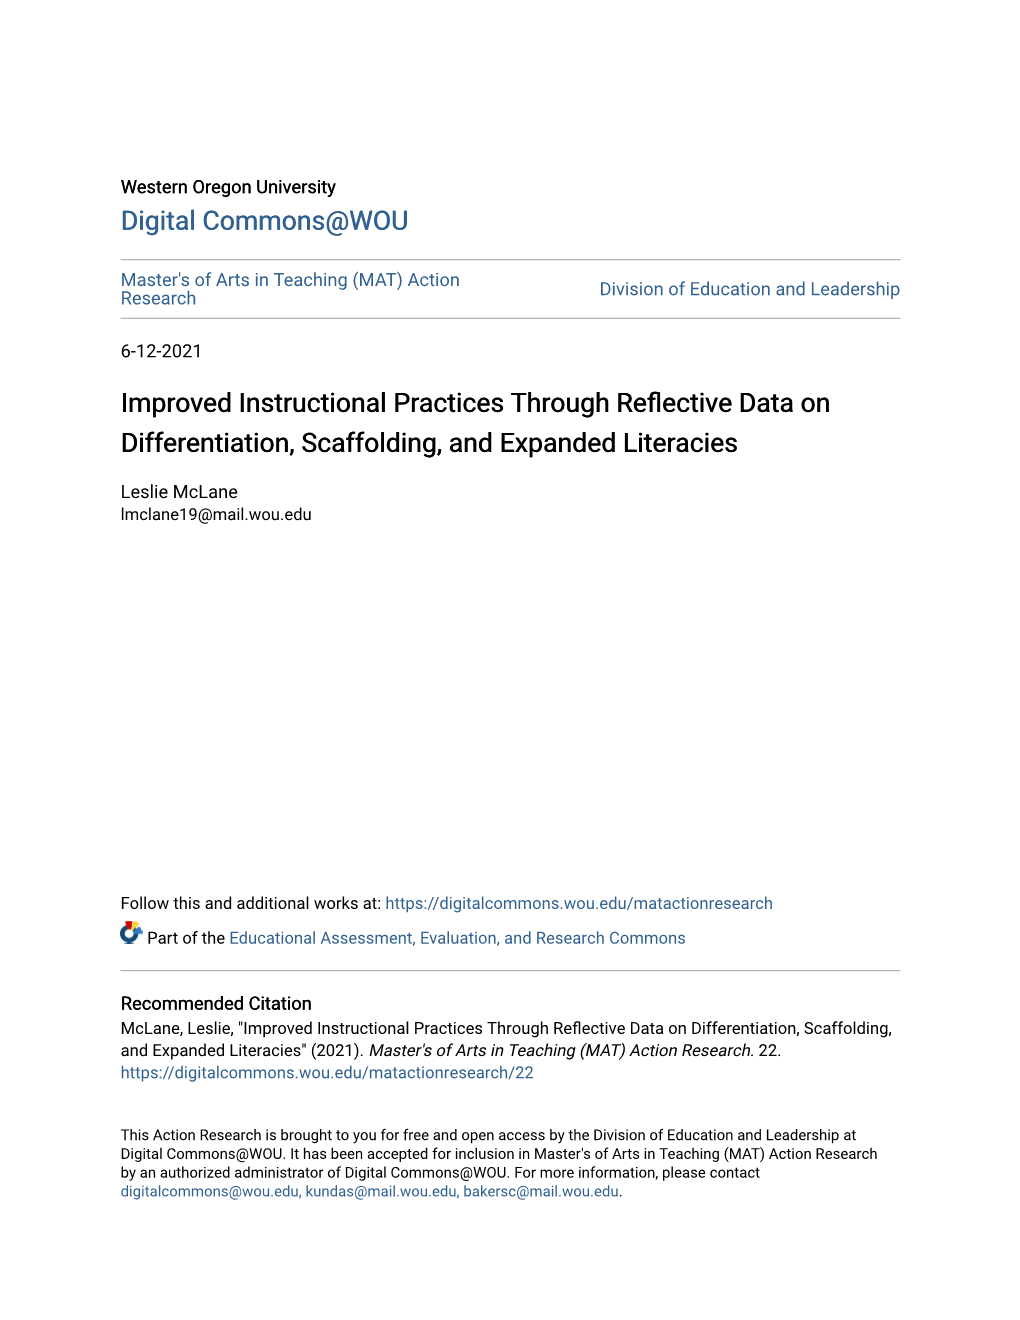 Improved Instructional Practices Through Reflective Data on Differentiation, Scaffolding, and Expanded Literacies